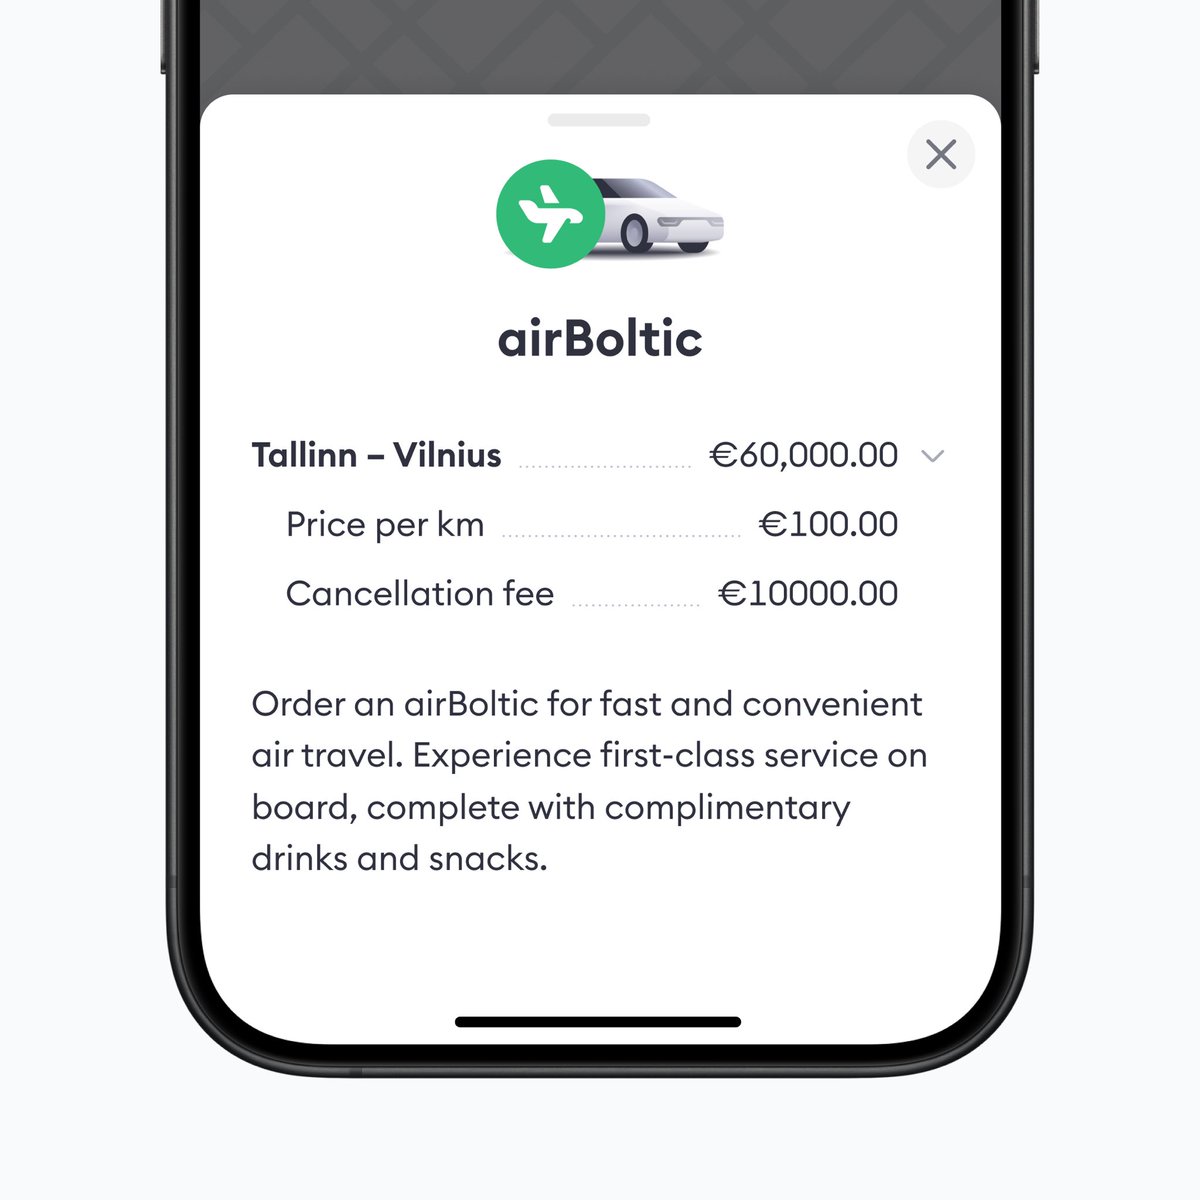 Introducing the latest innovation in travel: airBoltic ✈️ airBaltic and @boltapp have joined forces to offer an exclusive on-demand plane service across the Baltics to seamlessly transport you between the region’s capital cities. Think blue skies, fluffy clouds and skipping…